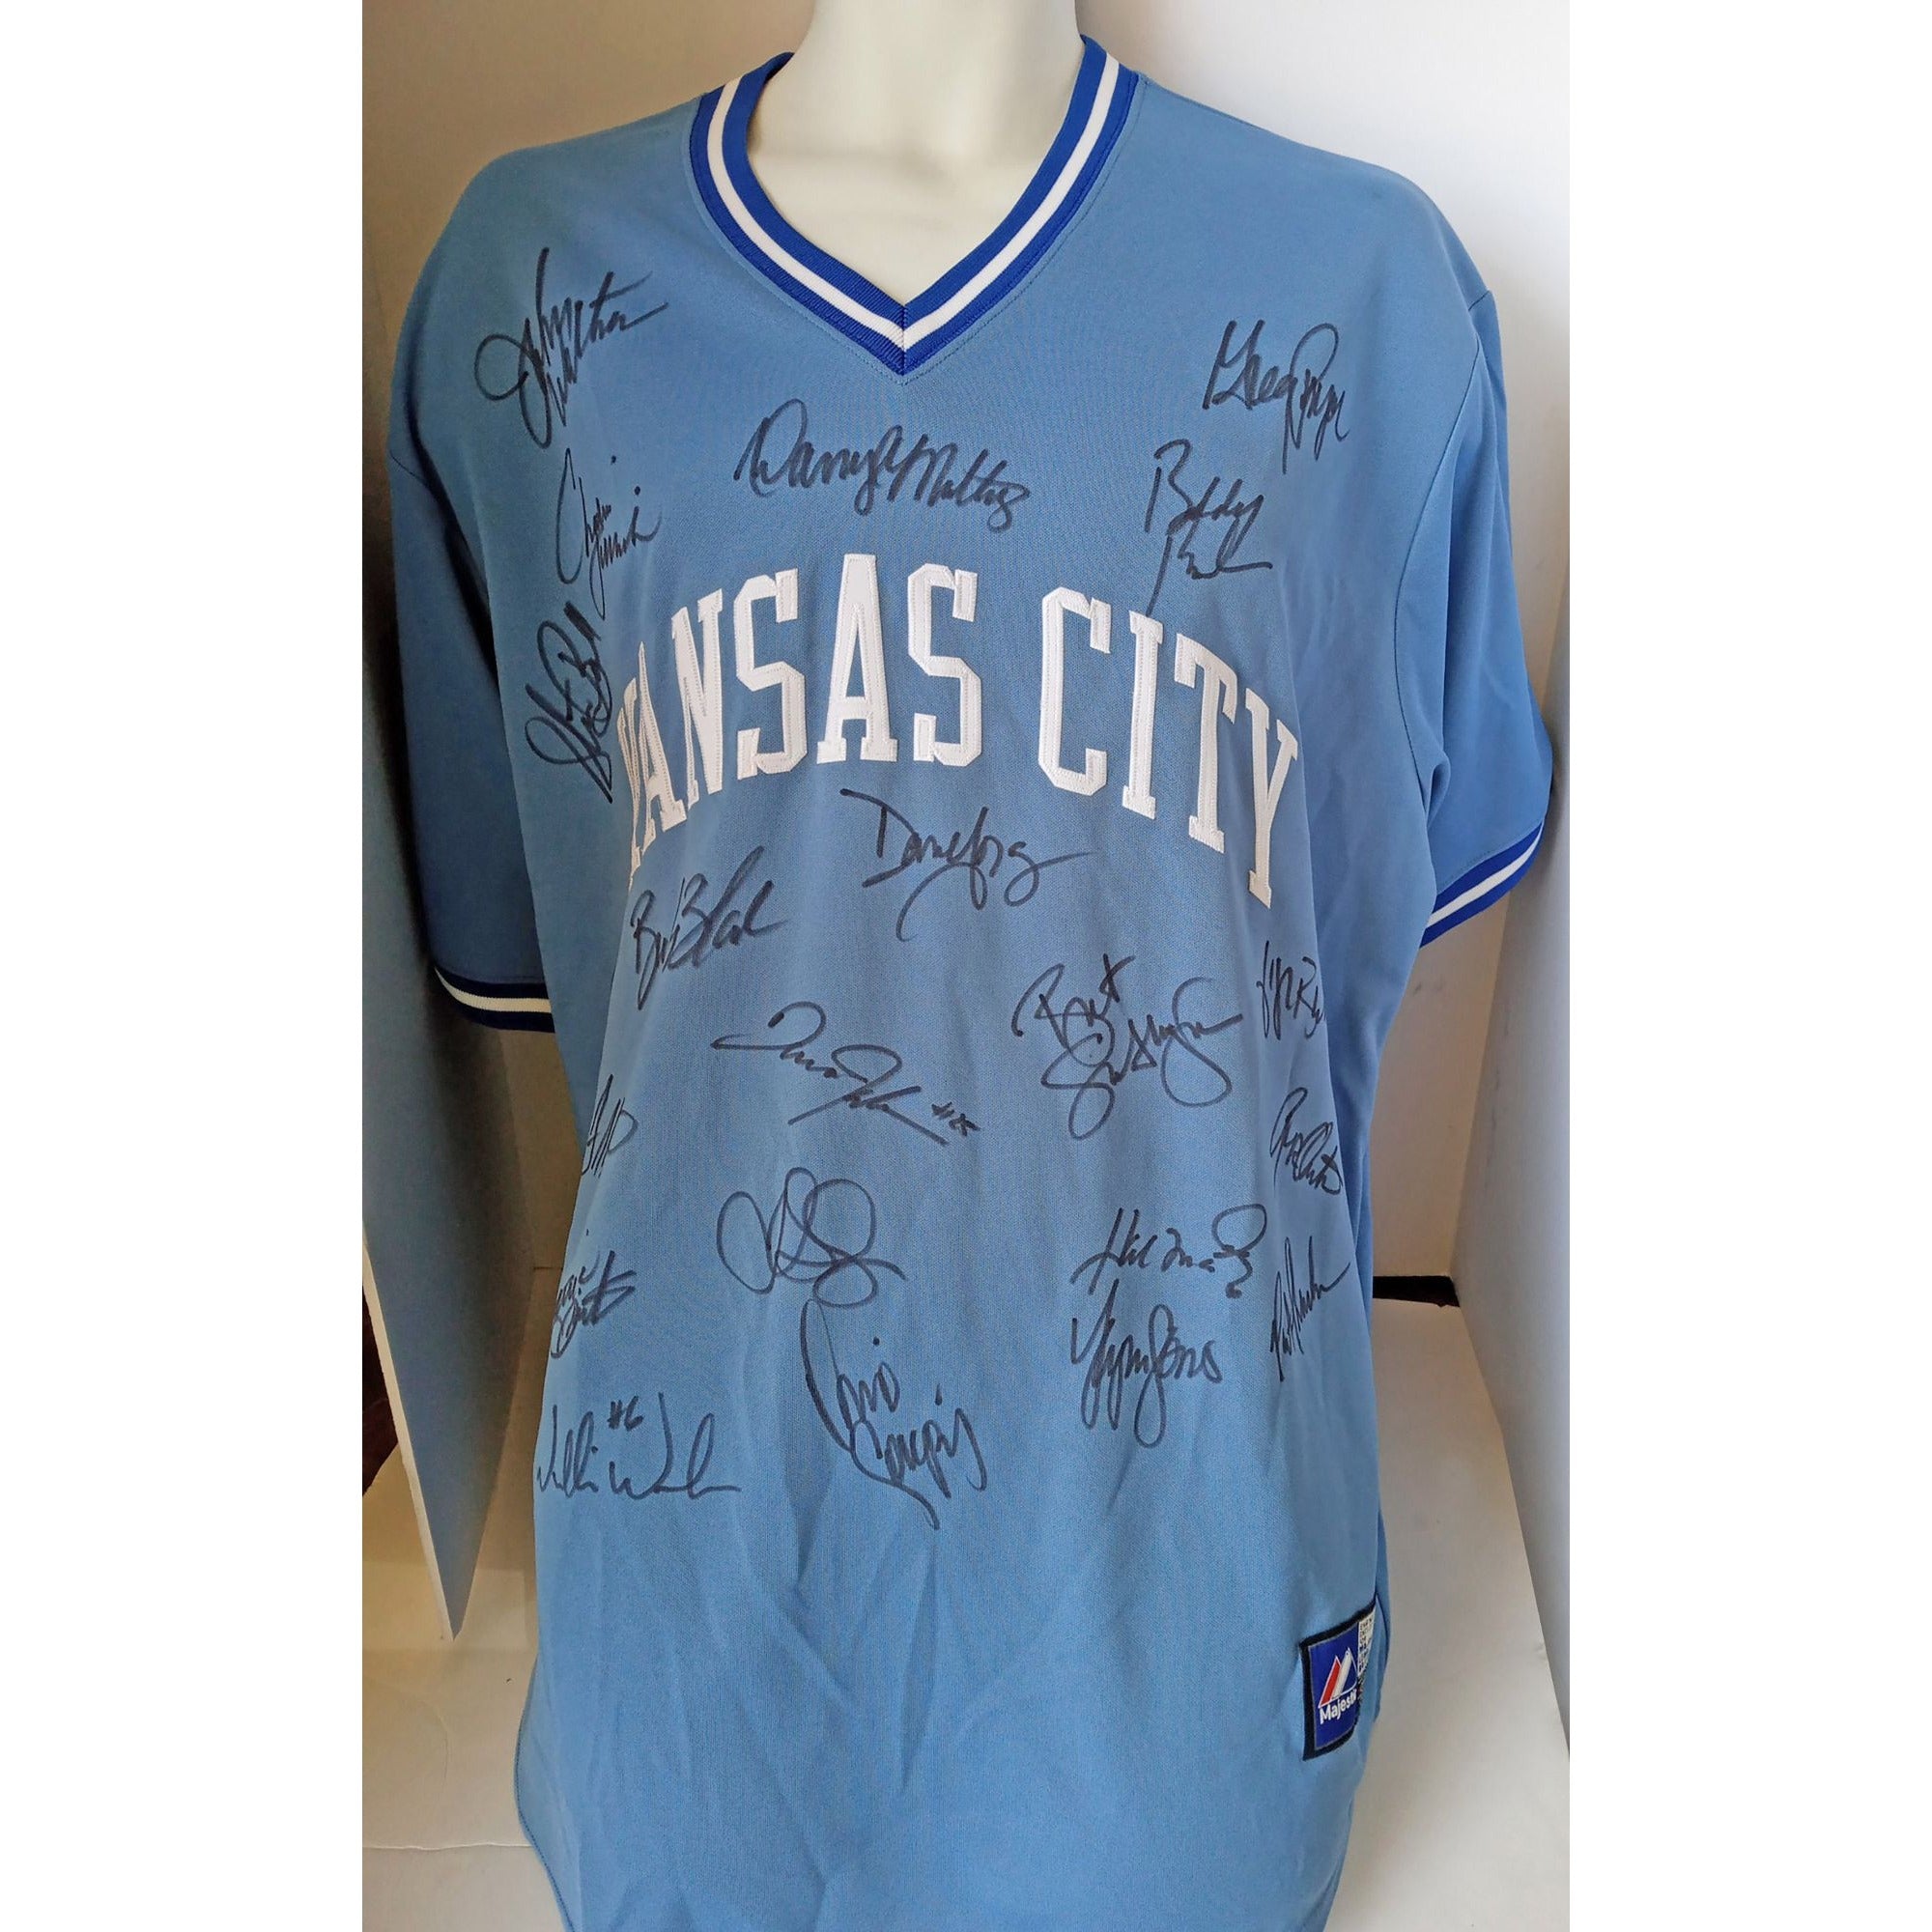 Kansas City Royals George Brett, Hal McRae World Series champions XL team signed jersey with proof